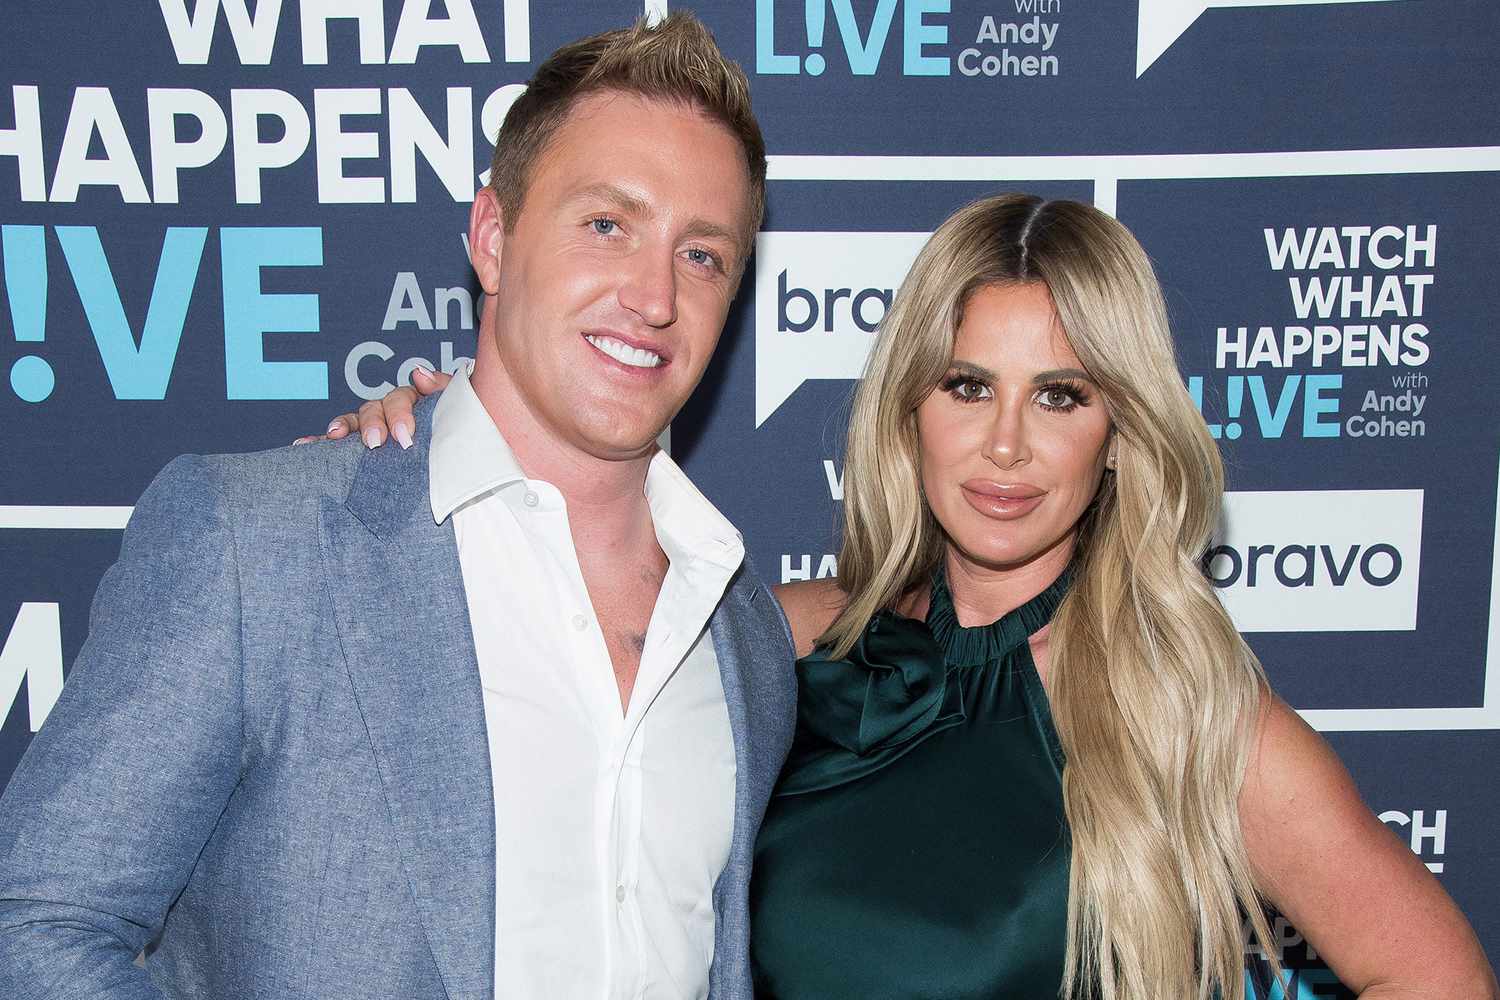 Kim Zolciak And Kroy Biermann’s Tumultuous Marriage Continues With Explosive Fight